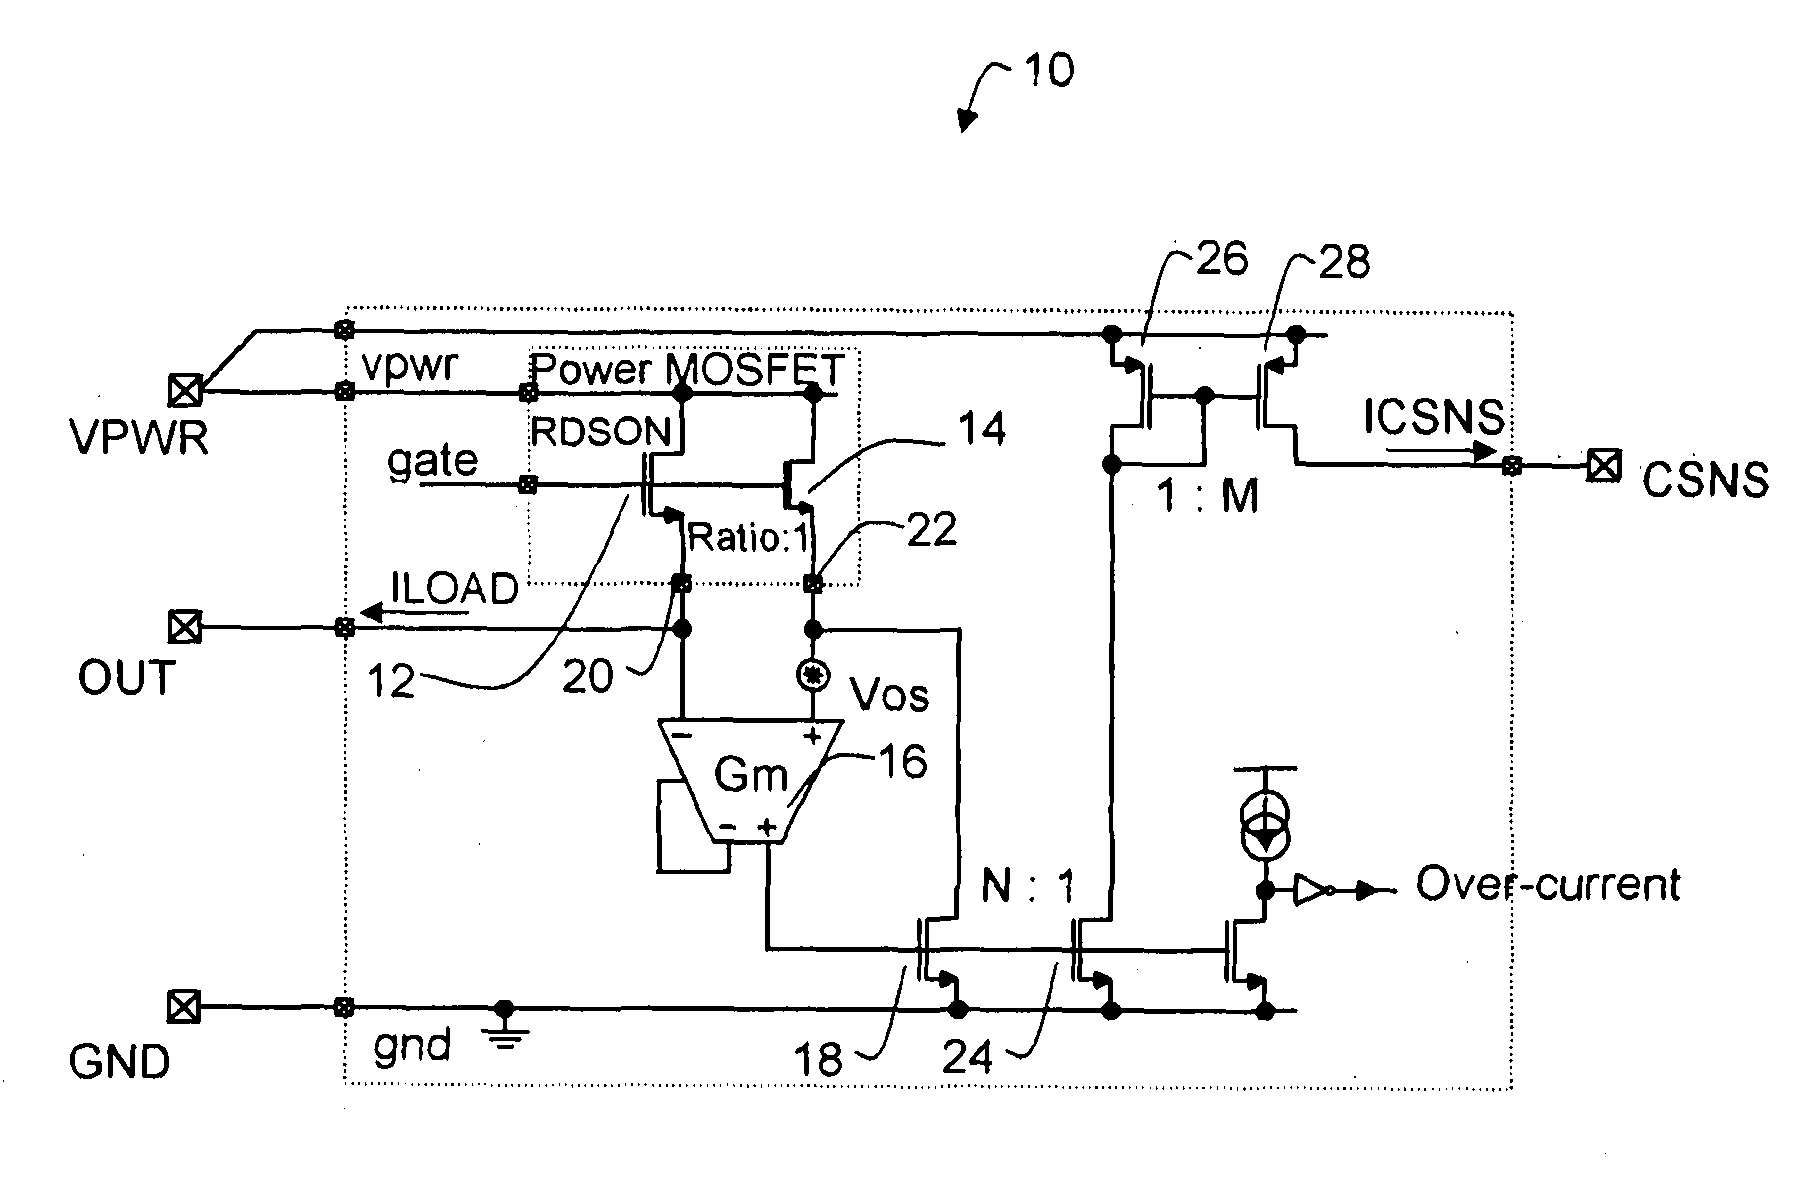 Power switching apparatus and method for improving current sense accuracy